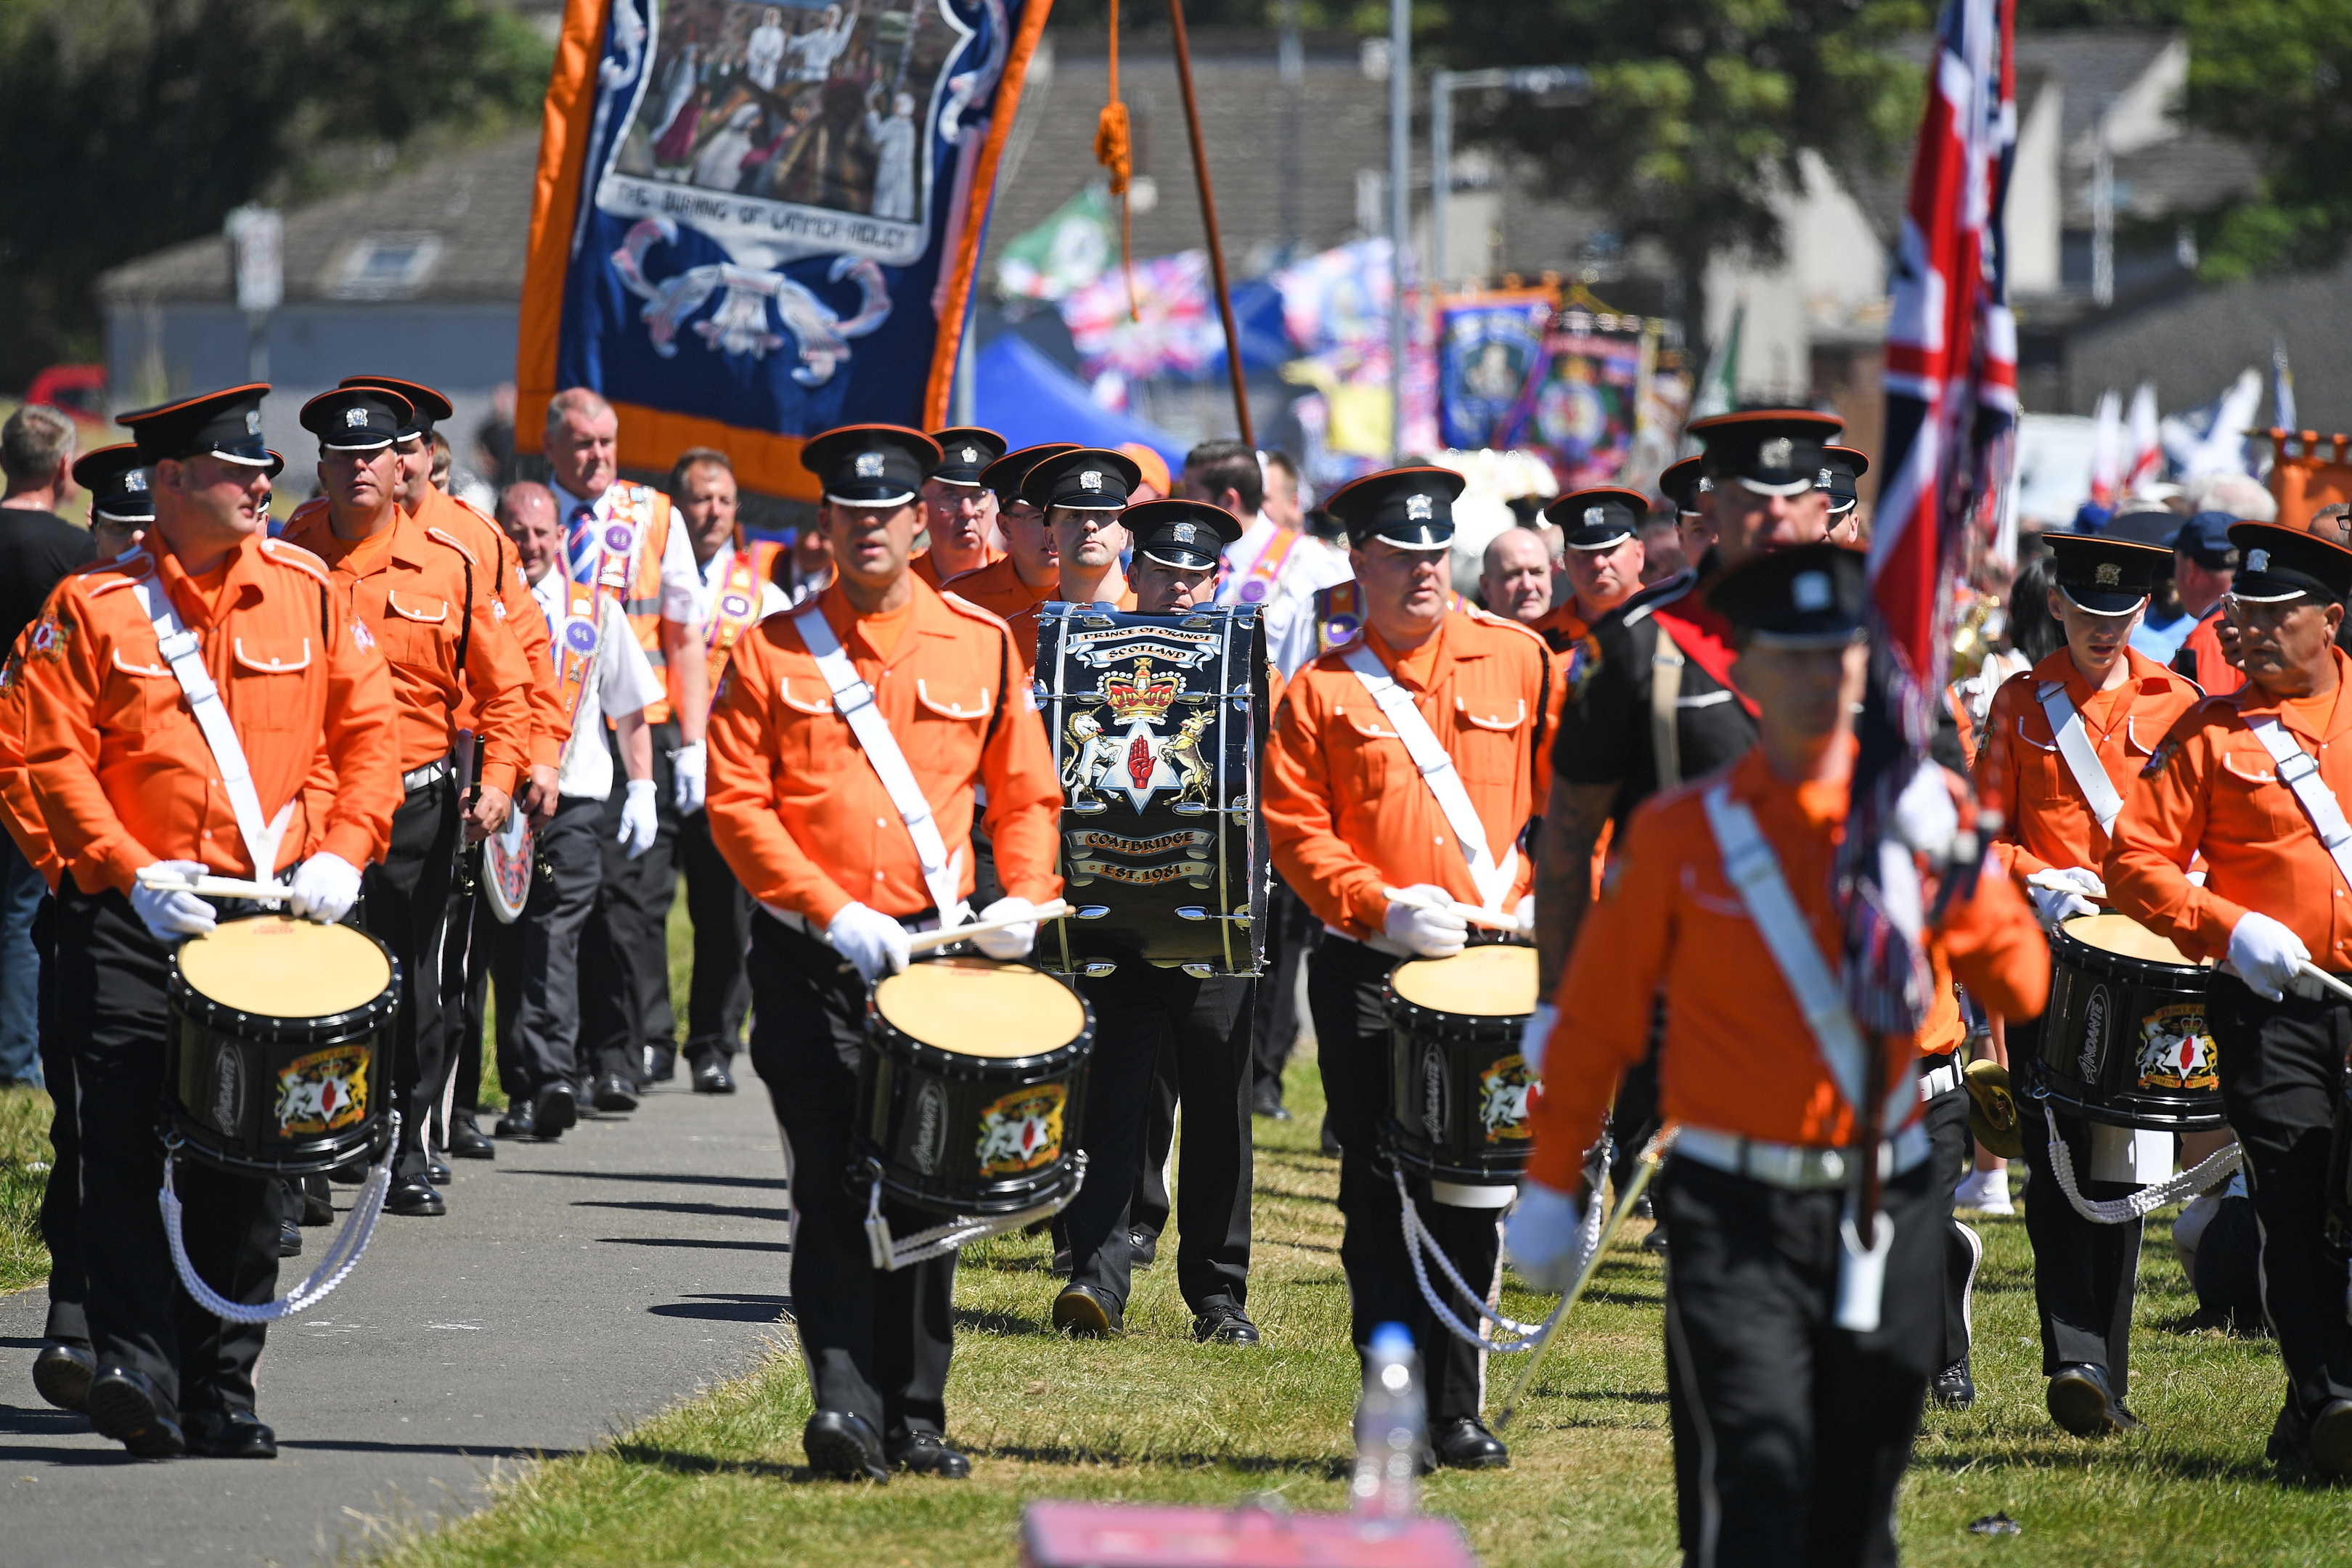 Members of the Orange Order attend the County Grand Lodge of East of Scotland district meeting on June 30, 2018 in Cowdenbeath, Scotland.